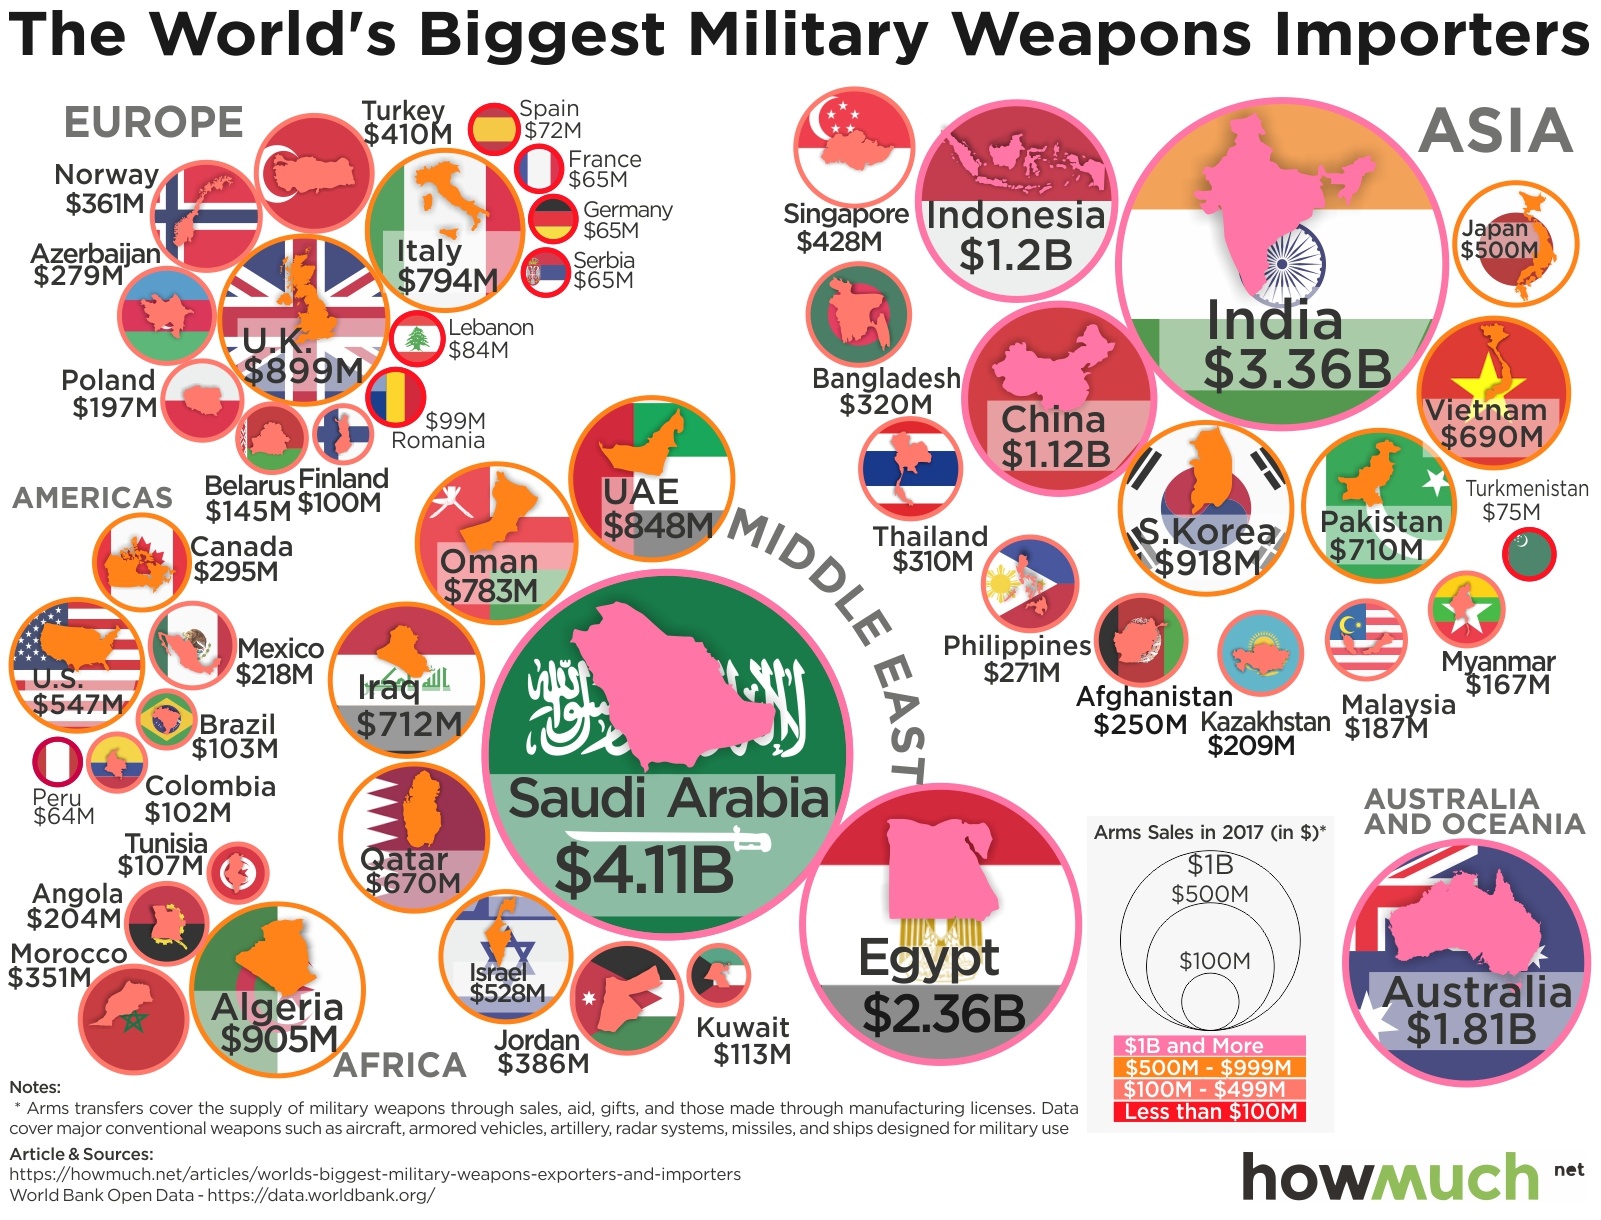 Lords of War: Visualizing the Global Arms Trade Network